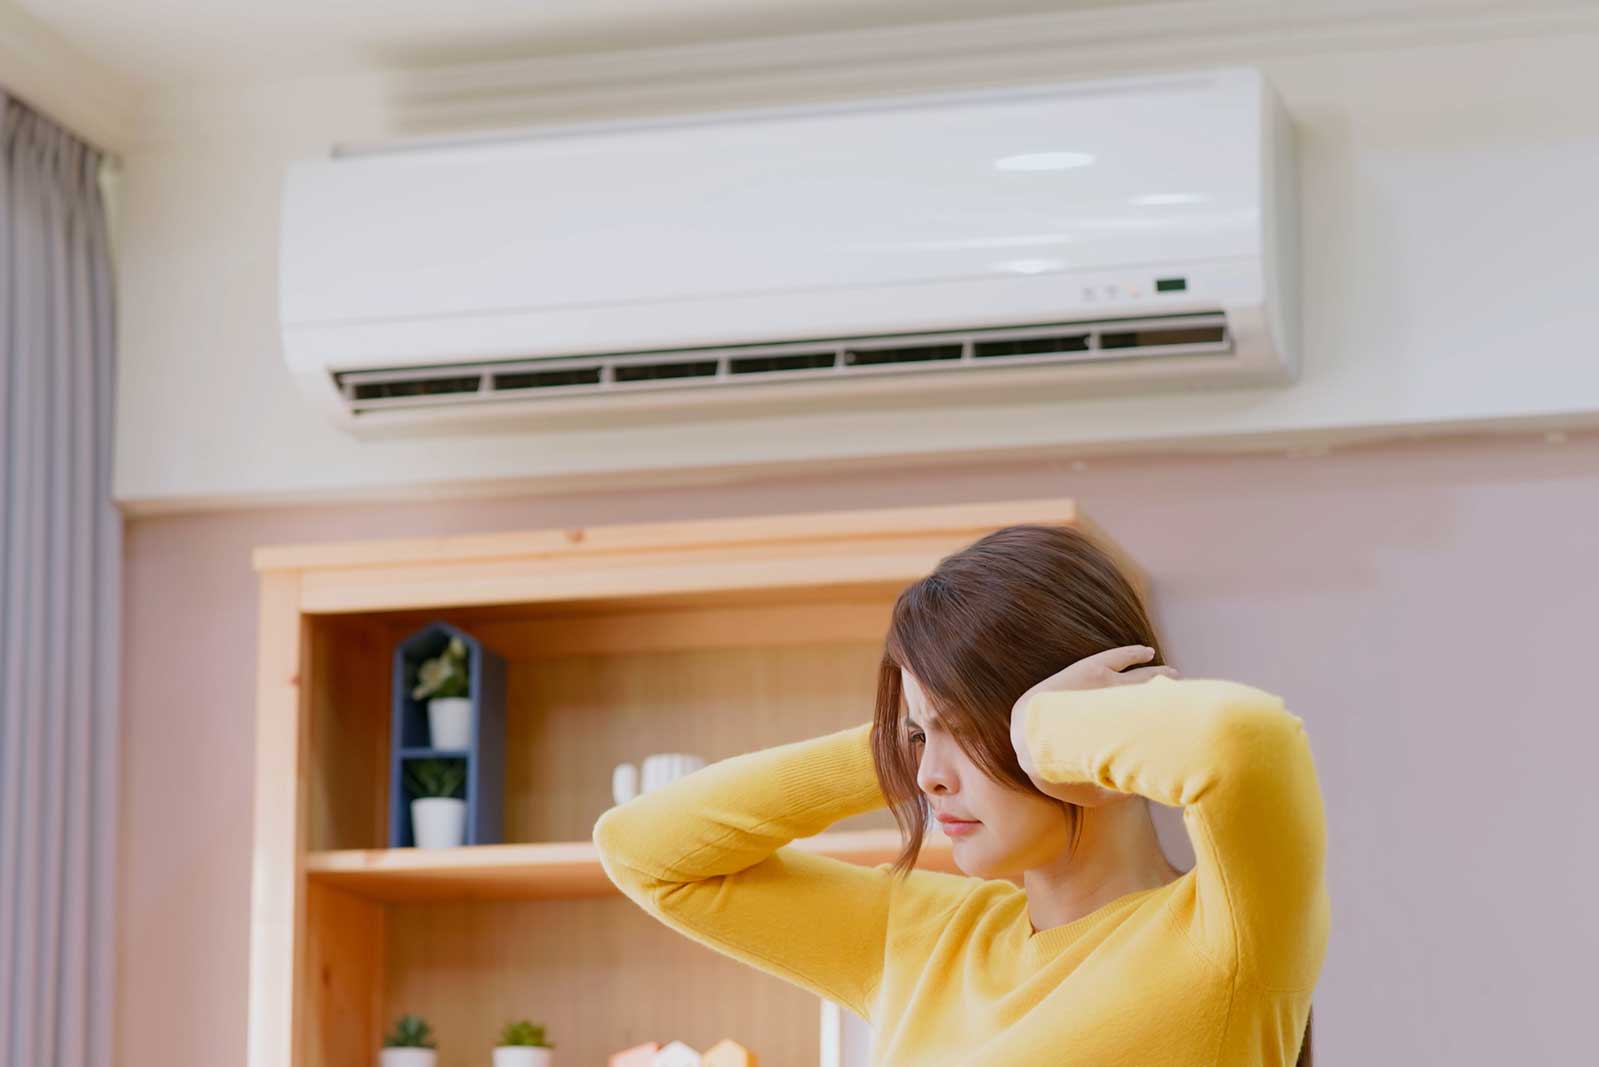 How To Fix The Error Code CH44 For LG Air Conditioner